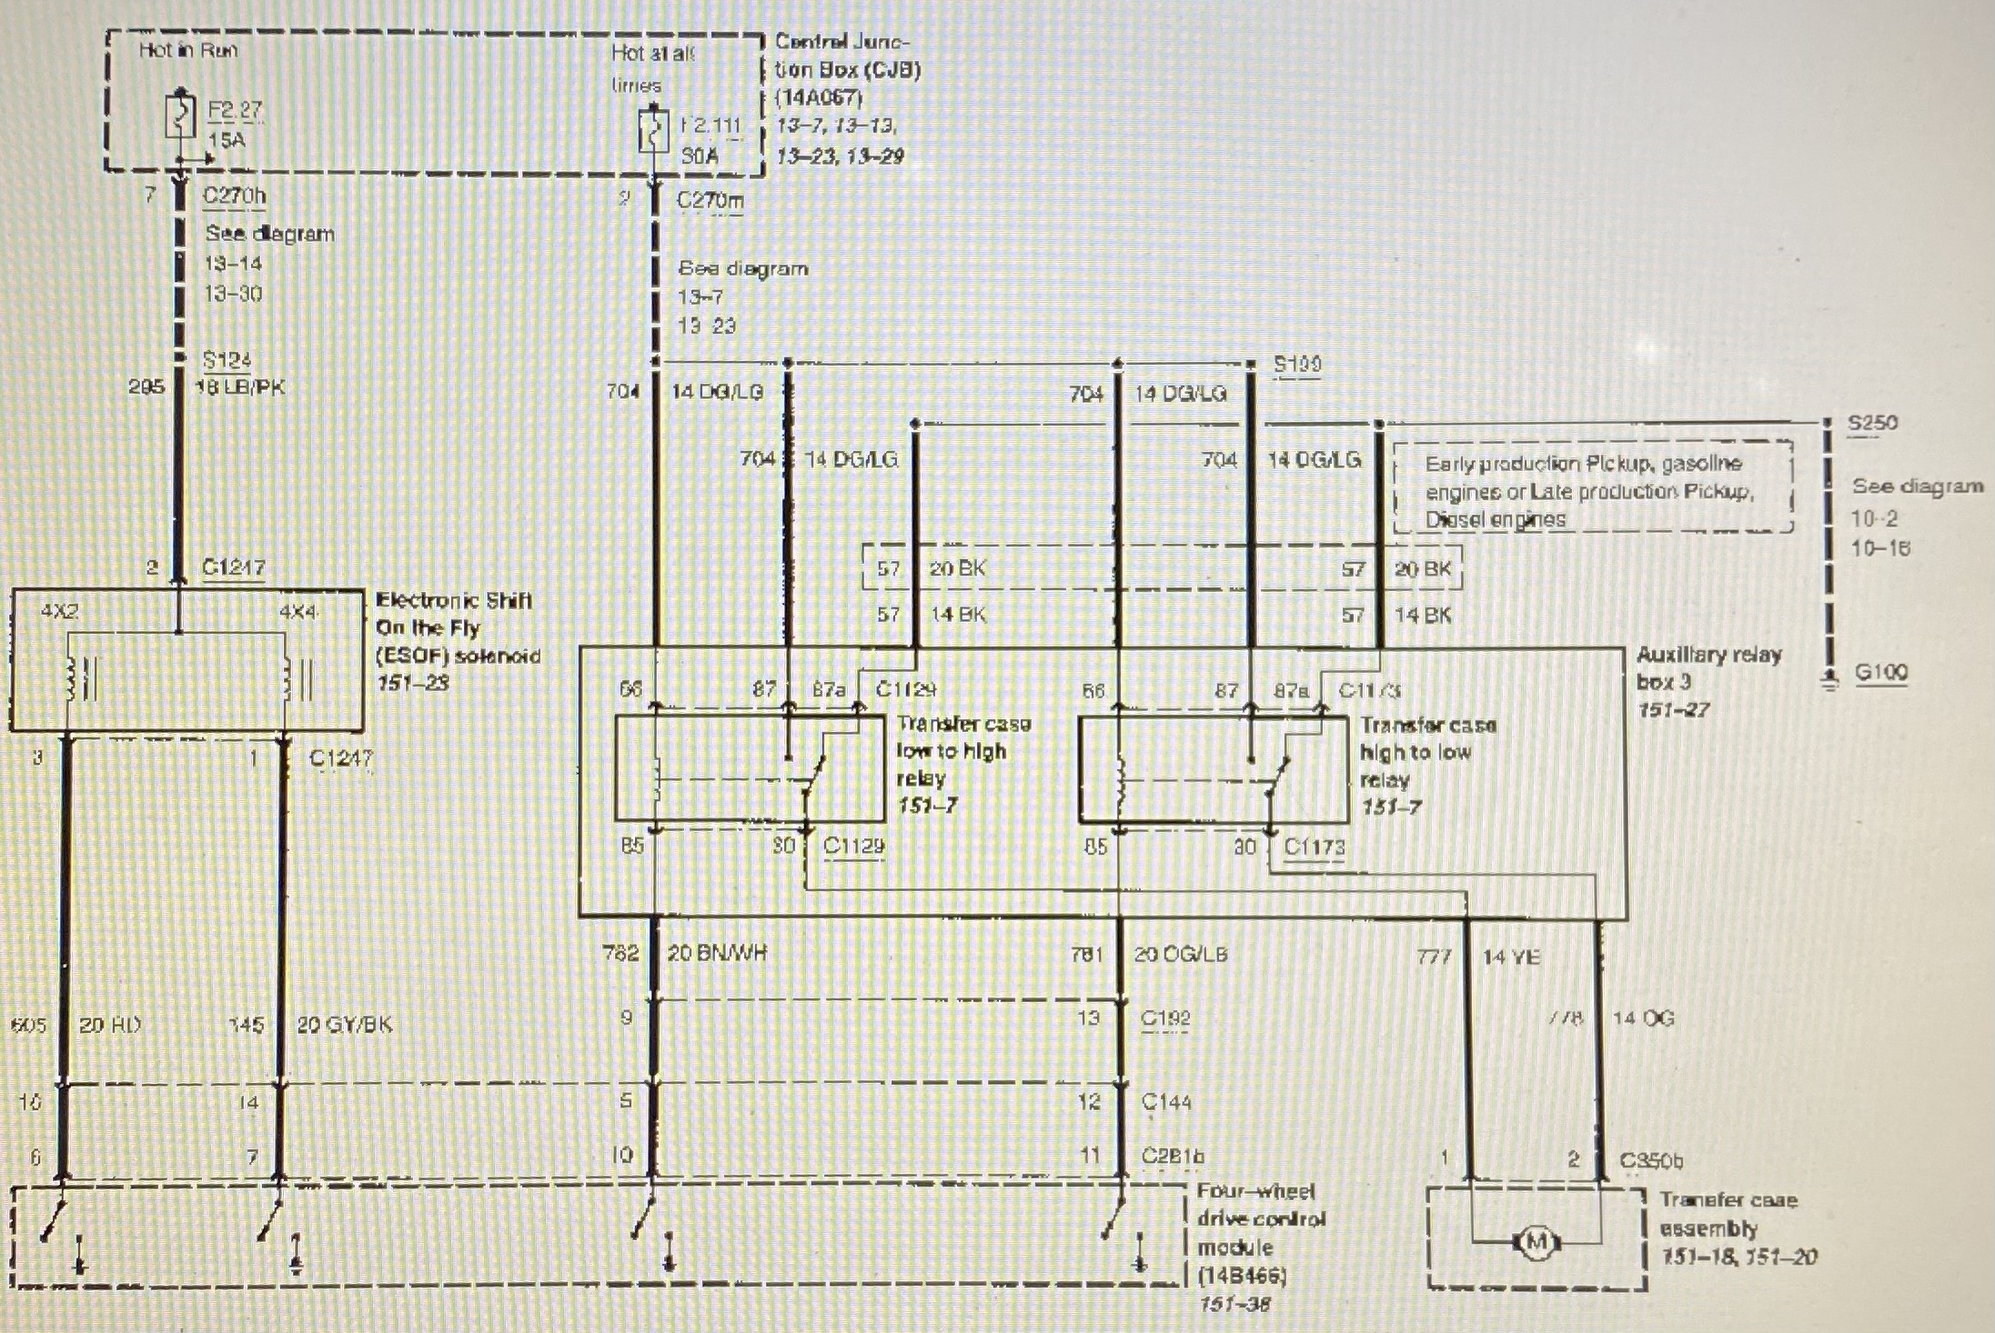 No power at fuse 31 - need wiring diagram? - Ford Truck Enthusiasts Forums